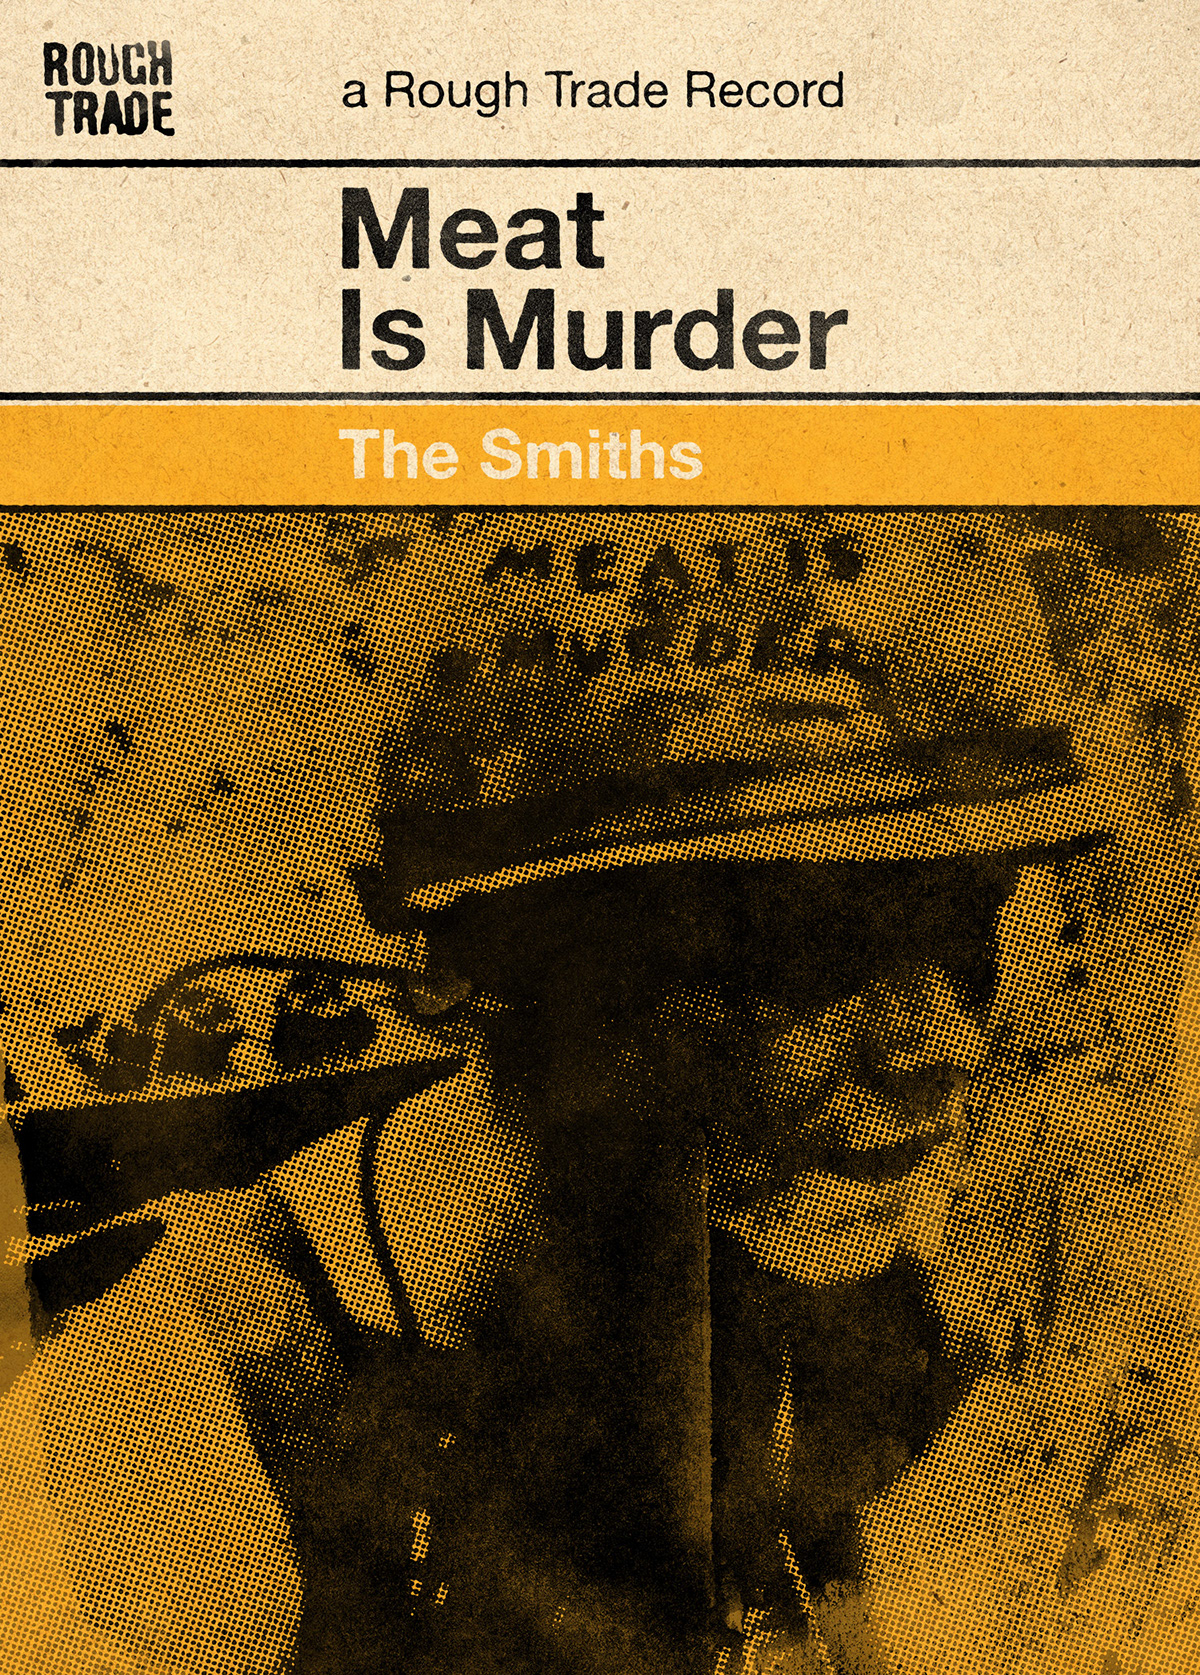 the smiths covers Retro penguin book posters